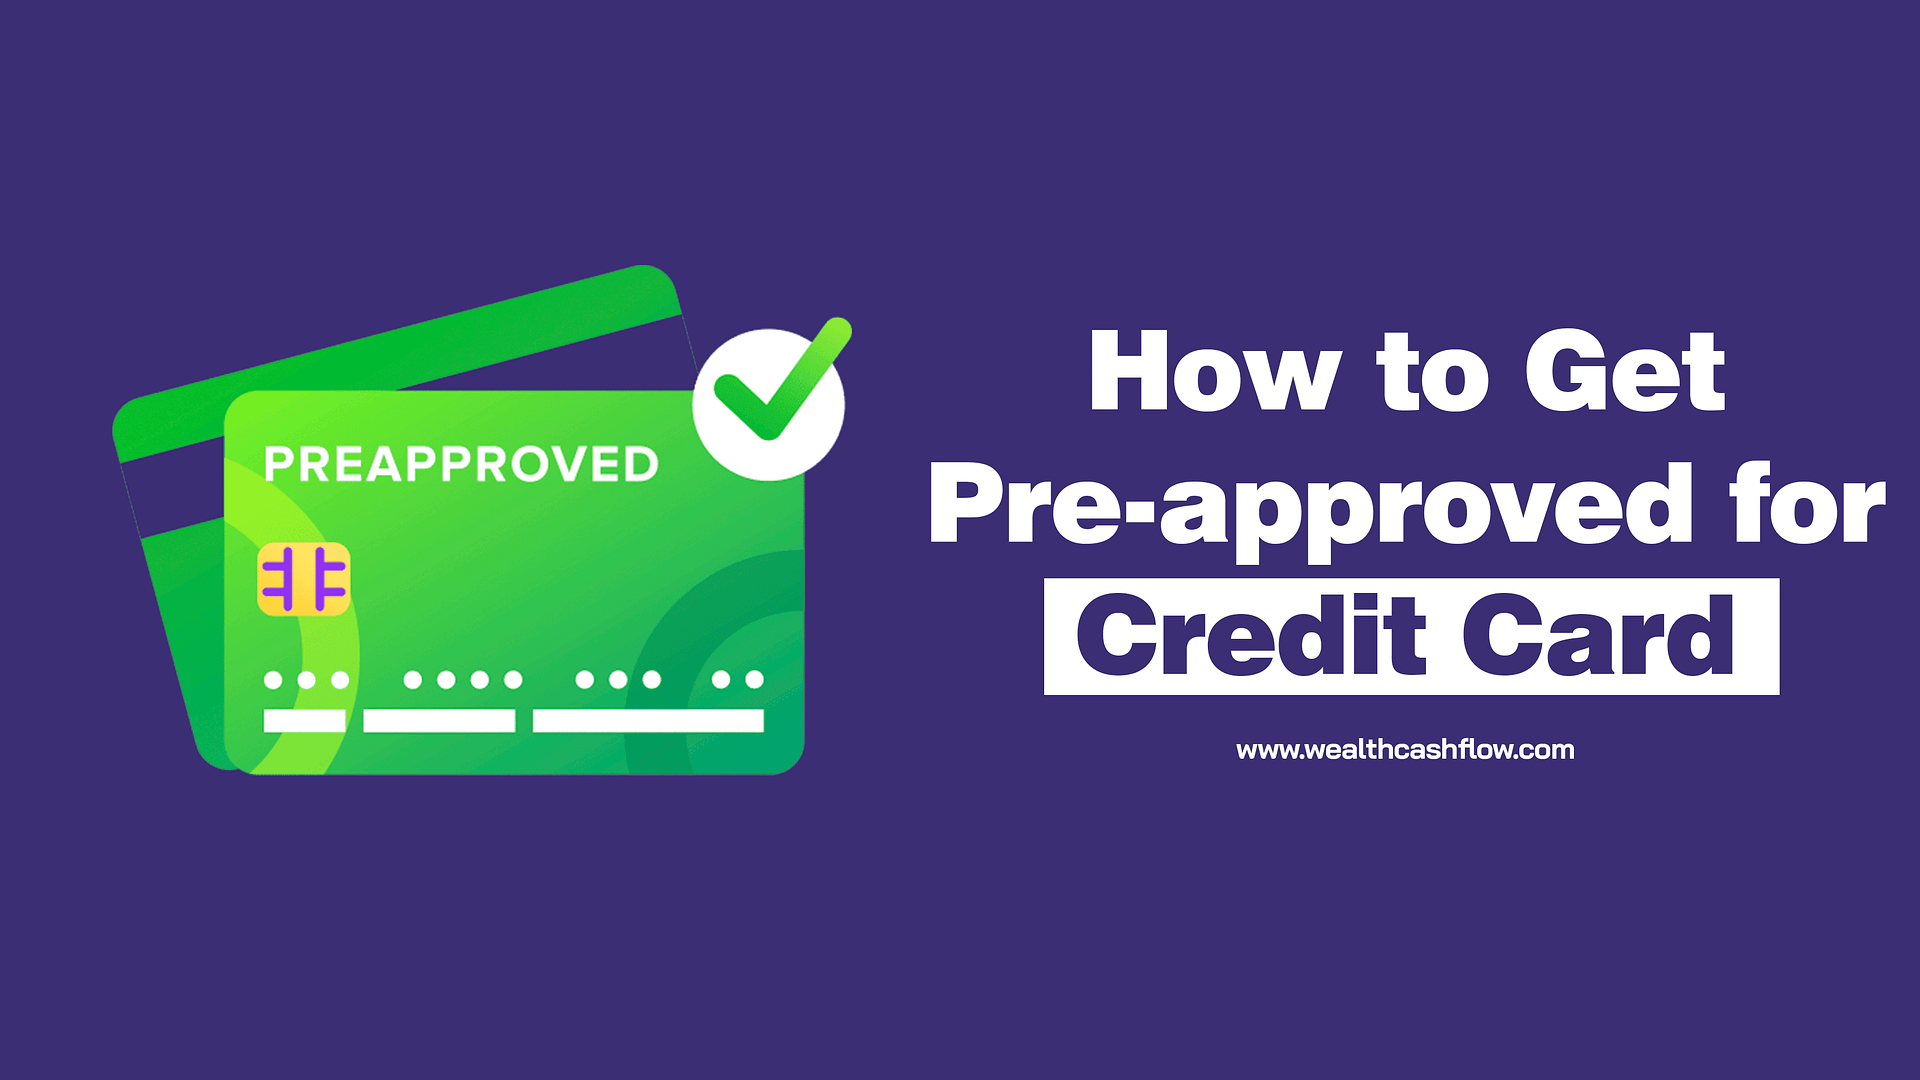 How to Get Pre-approved for a Credit Card